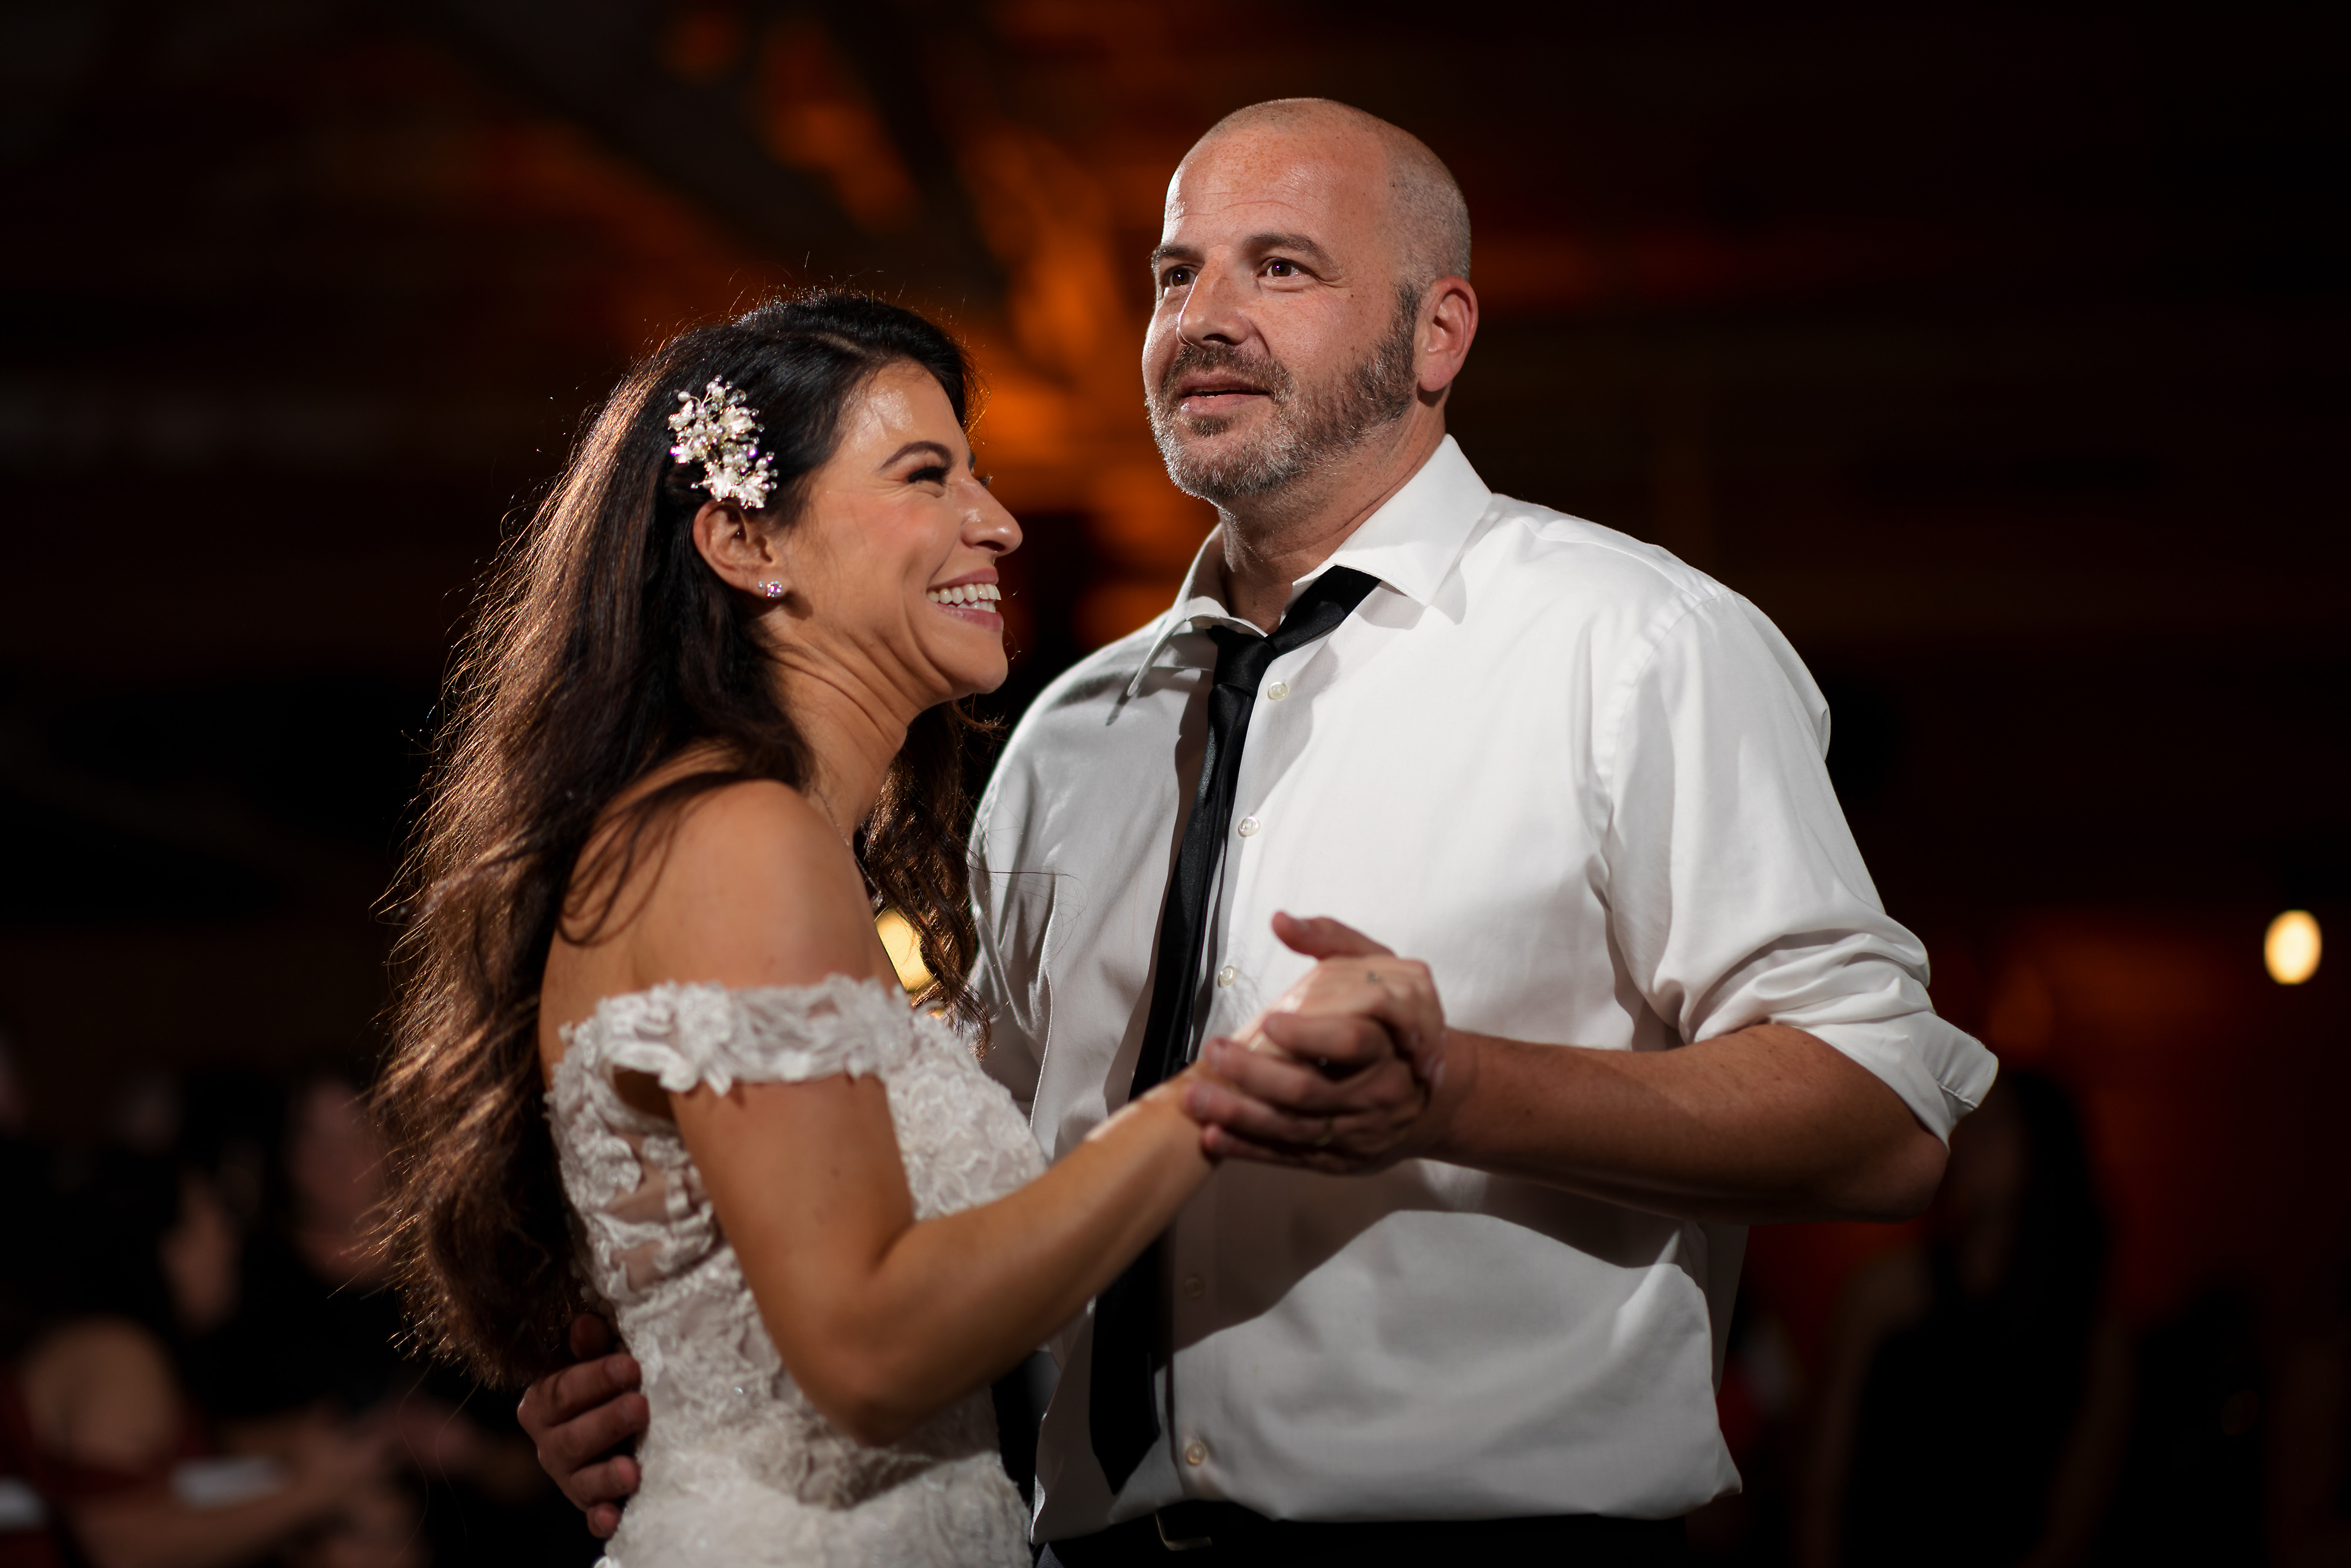 Bride first dance with brother during wedding reception at Sarabande in Chicago